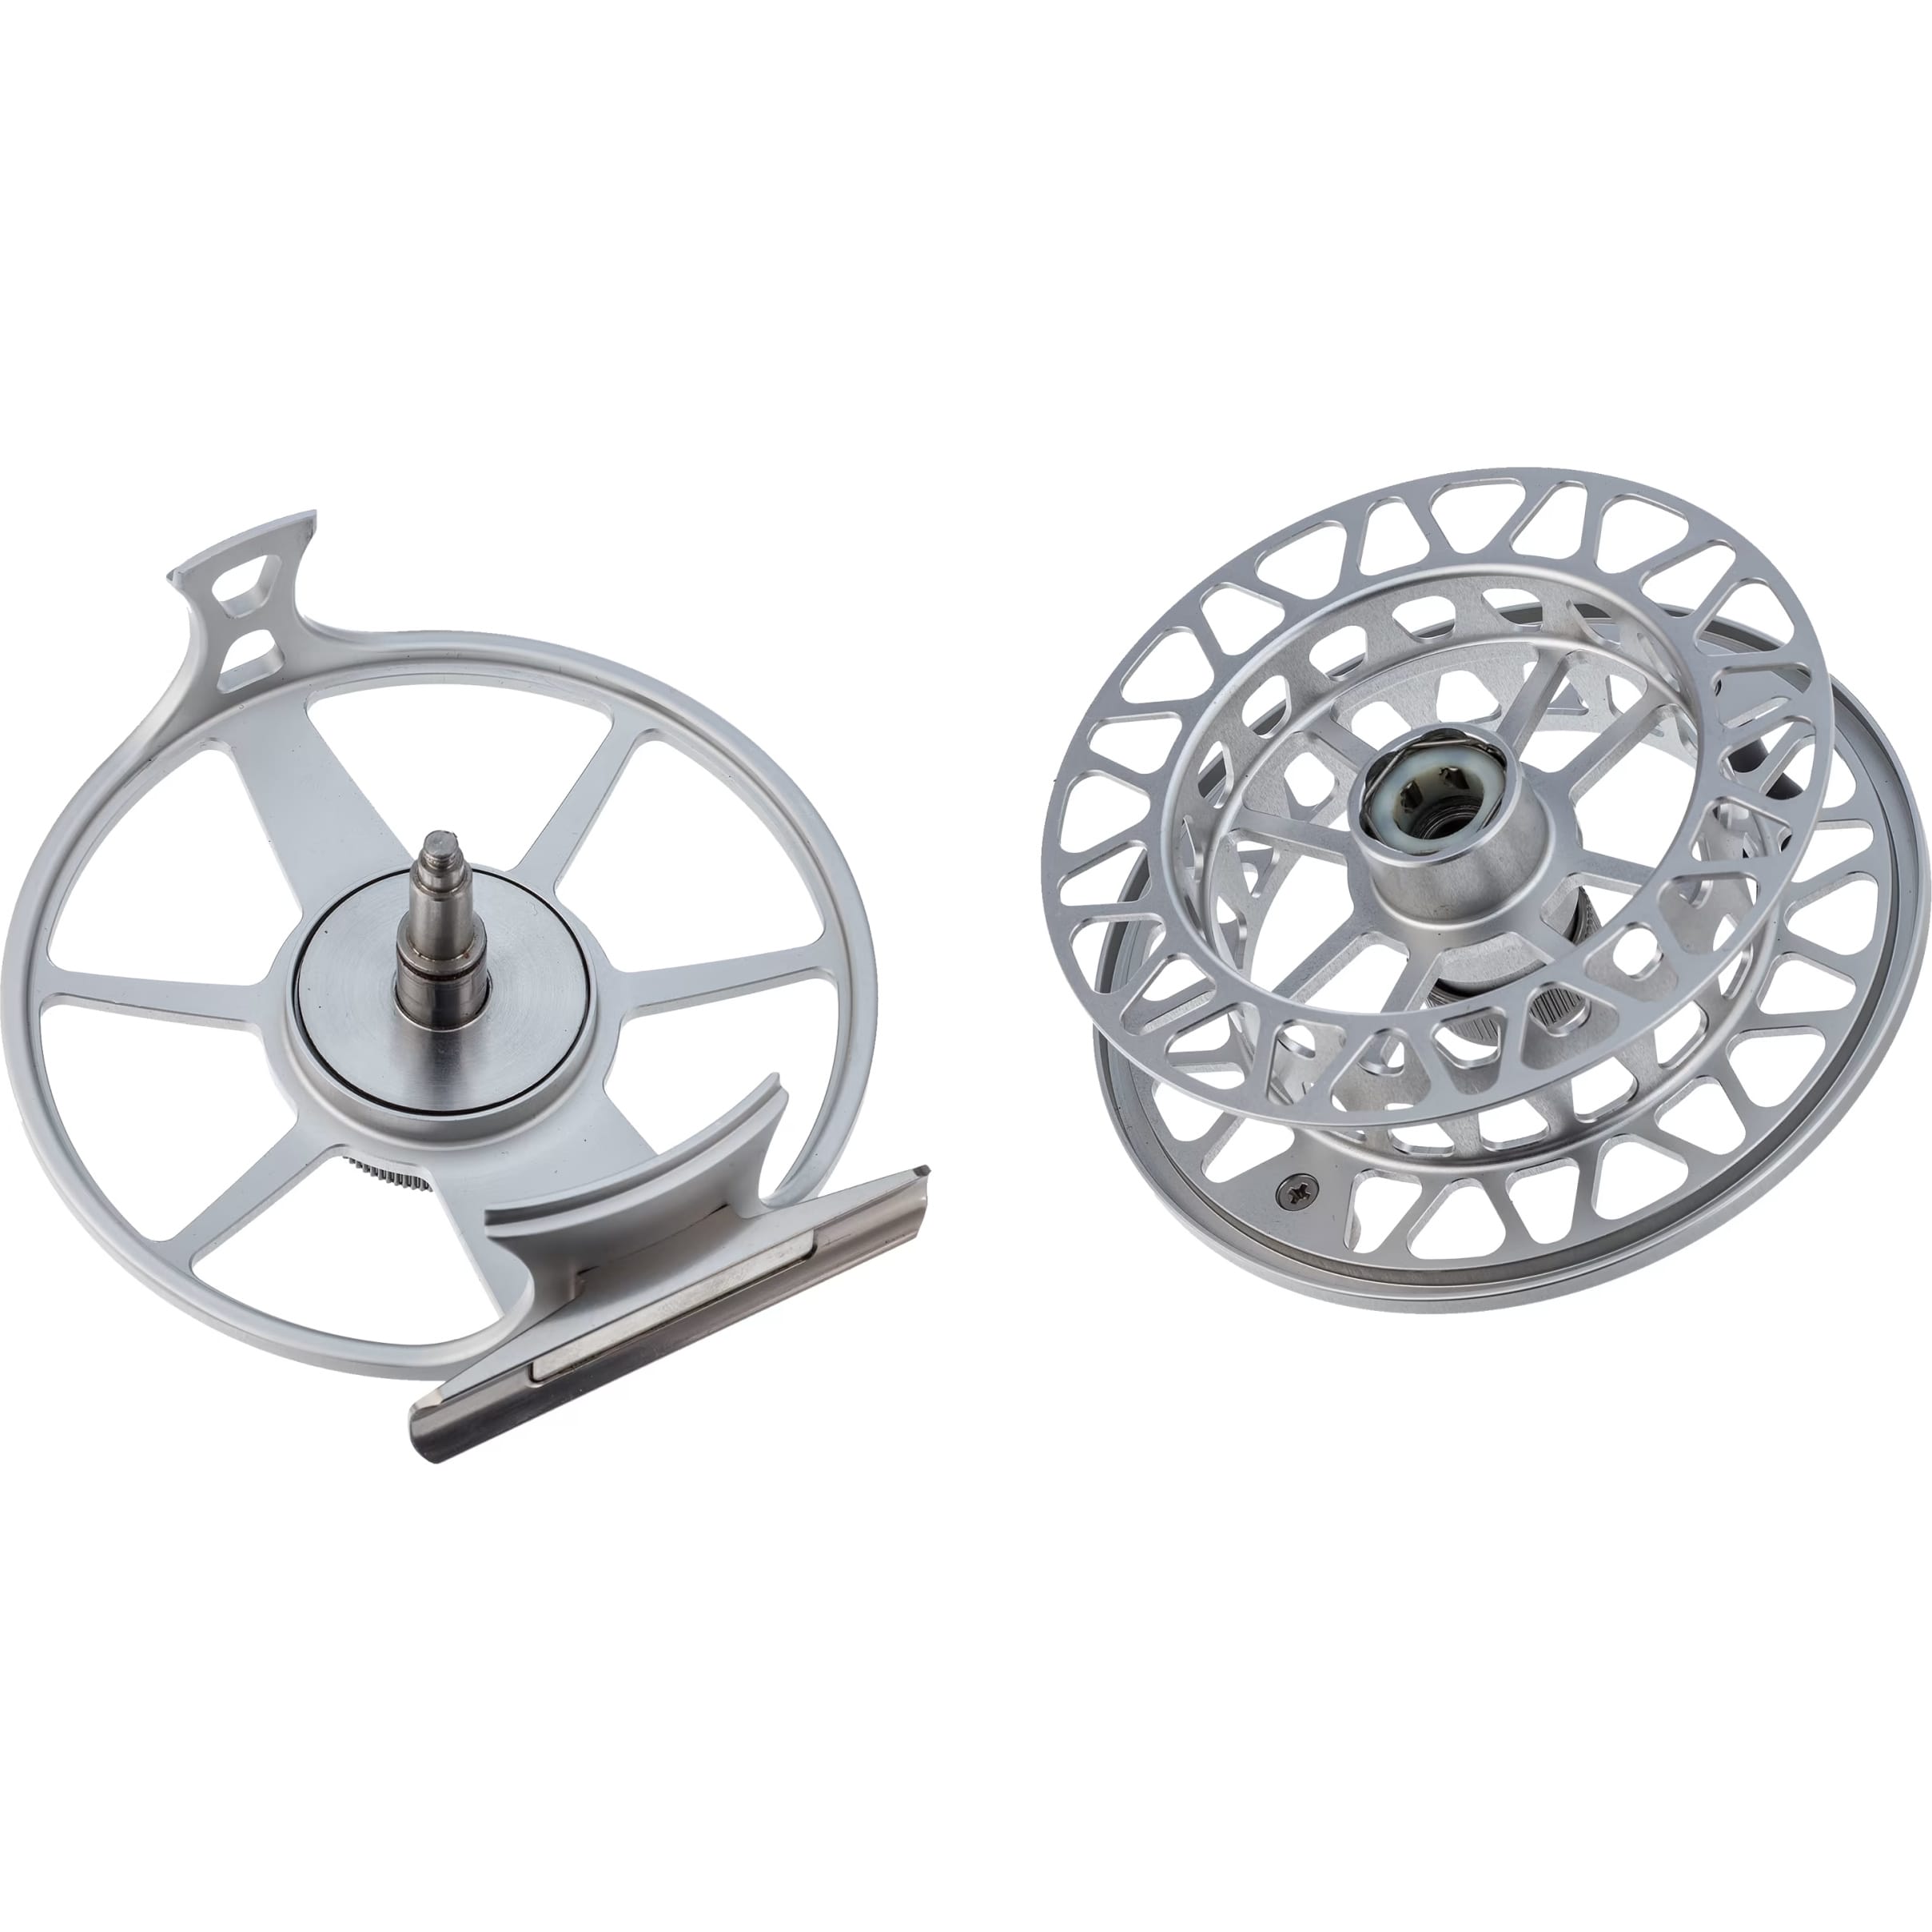 White River Fly Shop Kingfisher Fly Reel KFBB8, 7/8